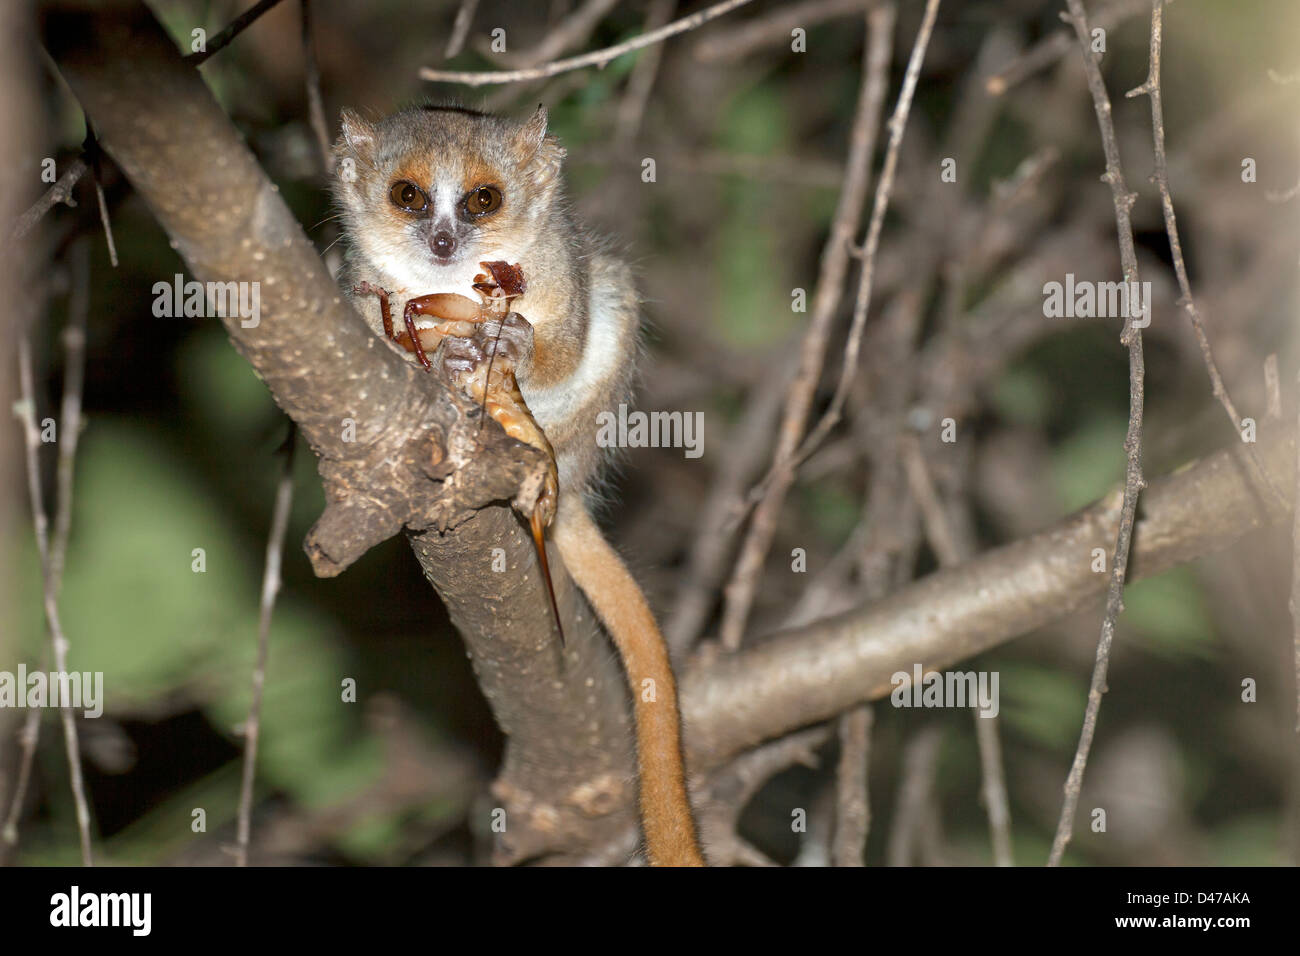 Mouse Eating Insect Stock Photos Amp Mouse Eating Insect